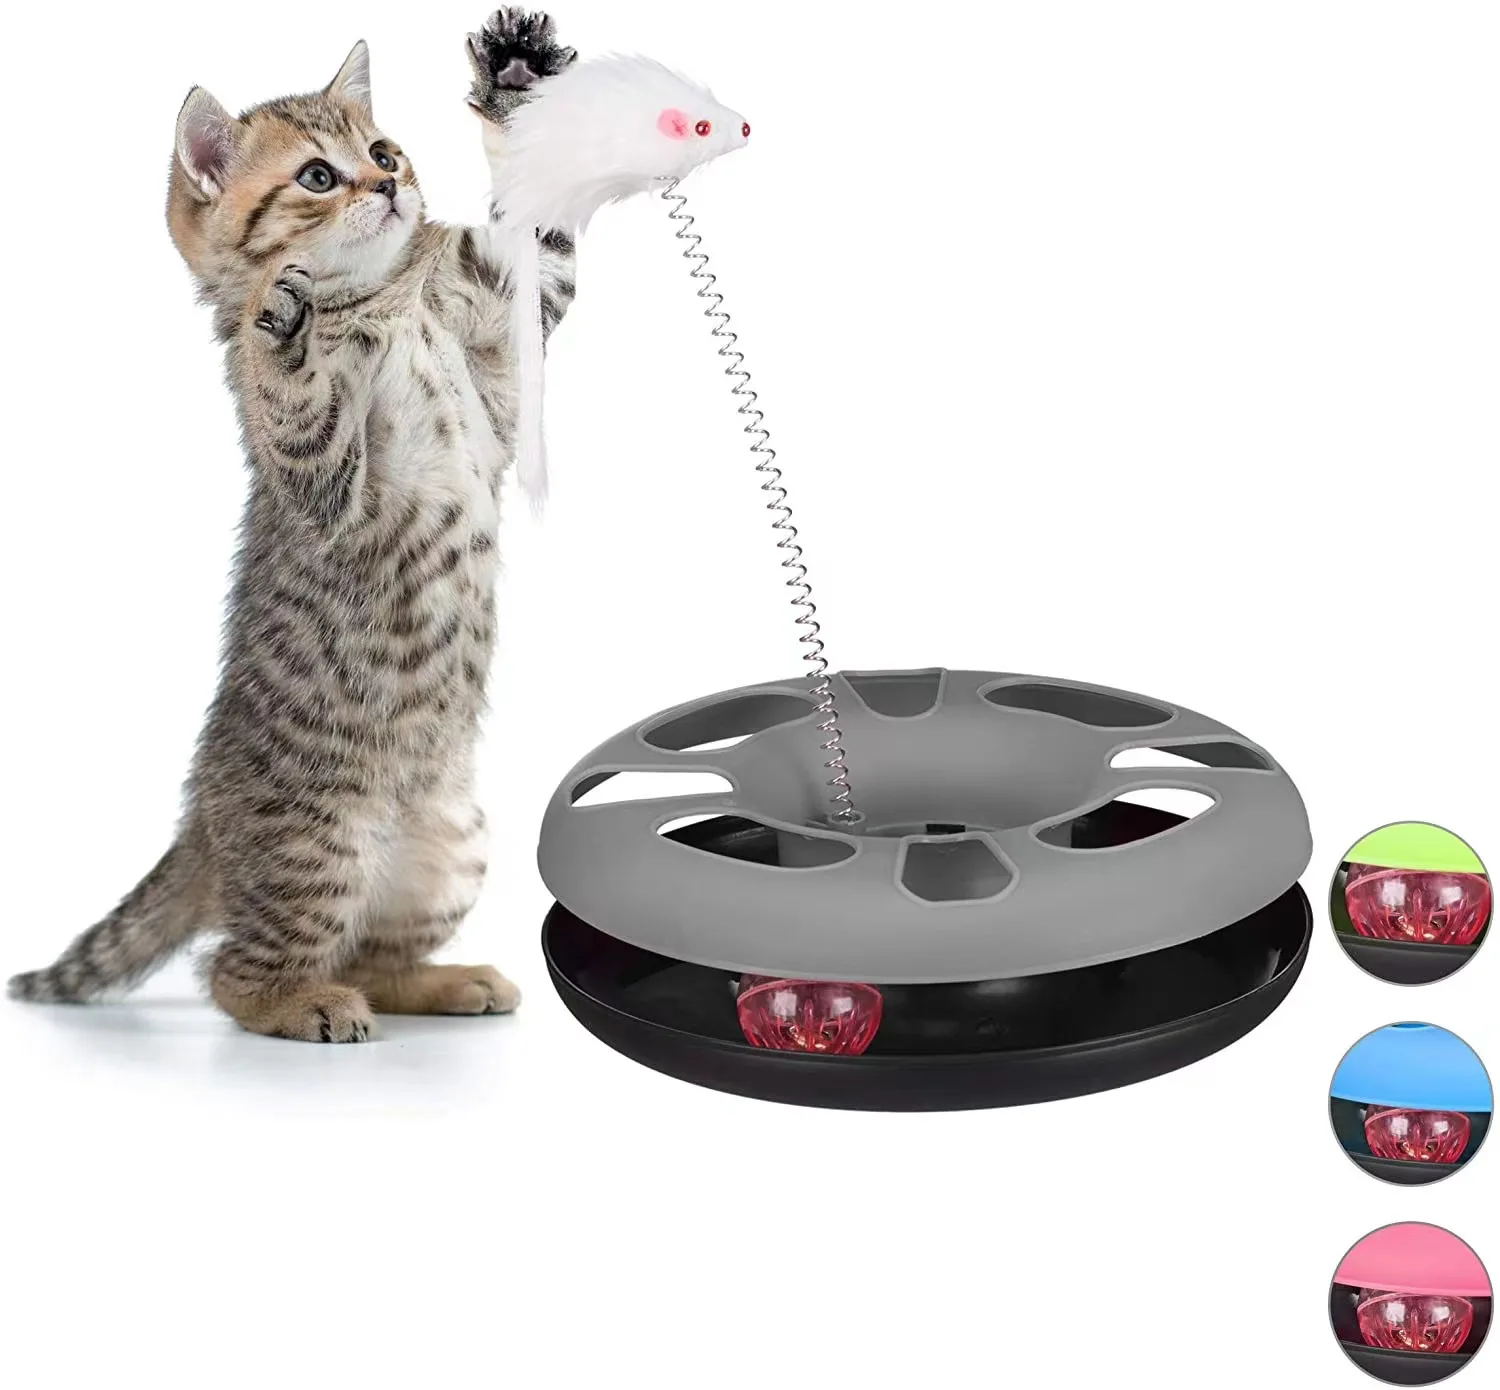 

Cat Toy Turntable Ball for Indoor Cats Interactive Kitten Toy Roller Tracks with Catnip Spring Pet Toy Teaser Mouse Pet Supplies